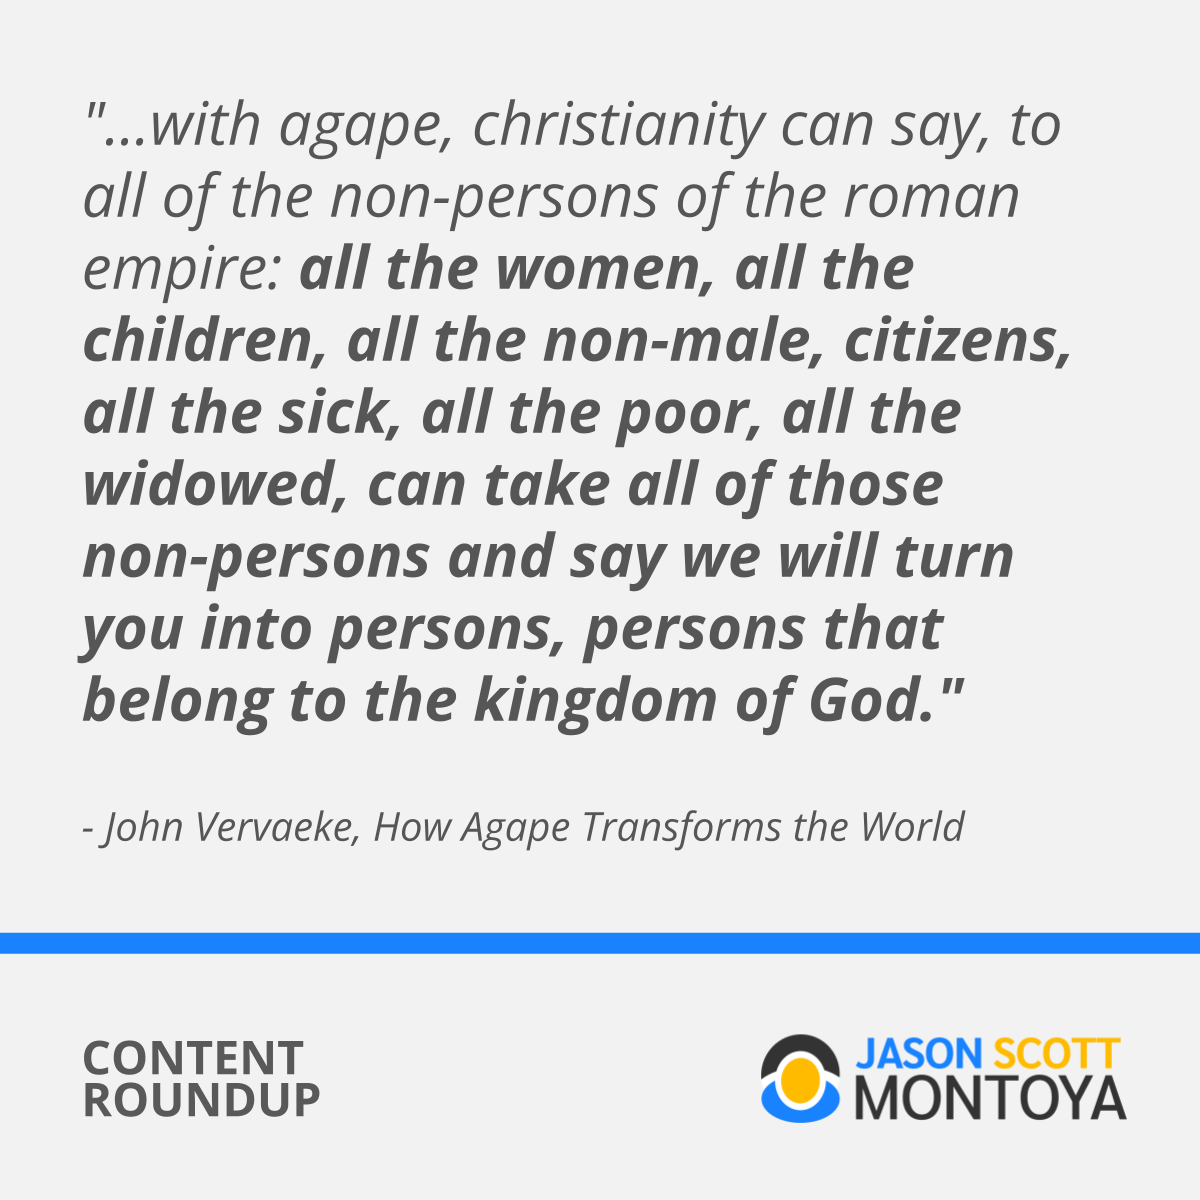 "with agape (love), christianity can say, to all of the non-persons of the roman empire: all the women, all the children, all the non-male, citizens, all the sick, all the poor, all the widowed, can take all of those non-persons and say we will turn you into persons, persons that belong to the kingdom of God." - John Vervaeke